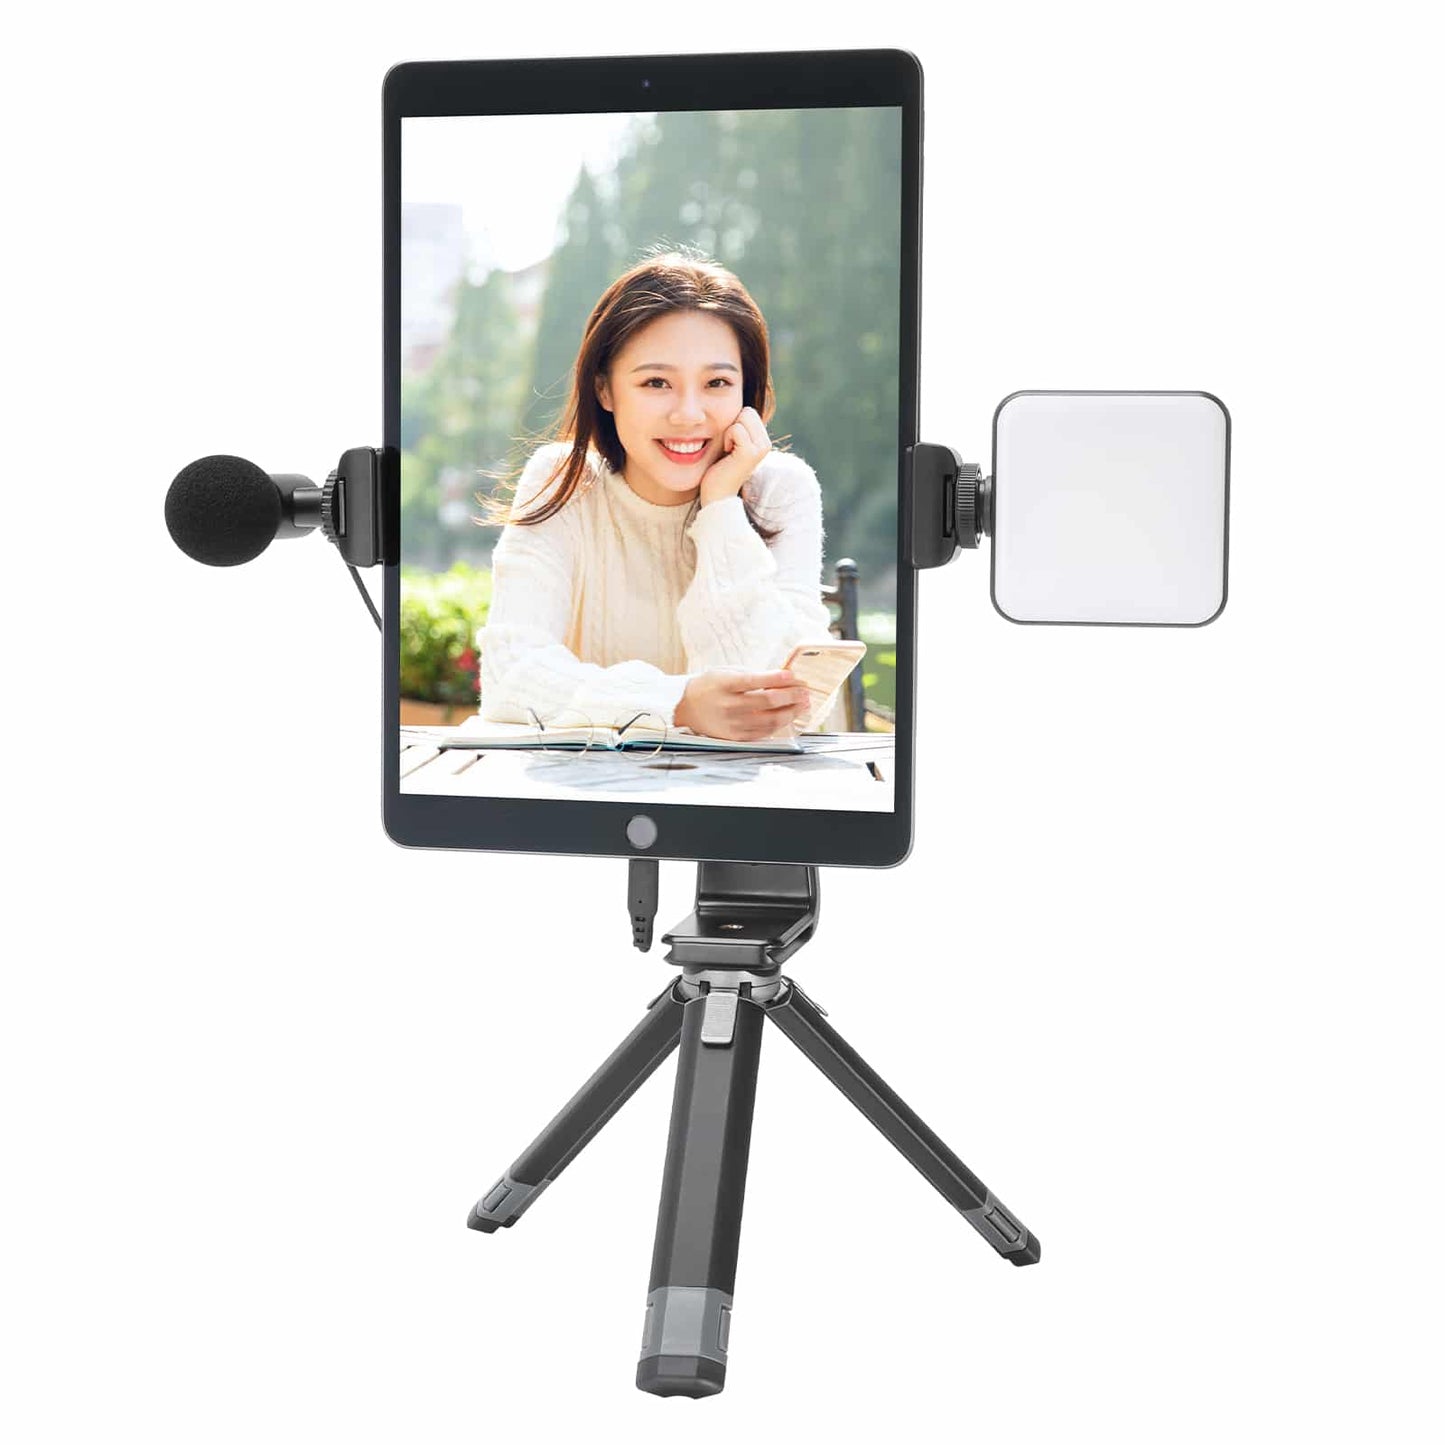 Ulanzi ST-20 360º Rotatable Tablet Holder for Tripod - with 2 Cold Shoe Mounts